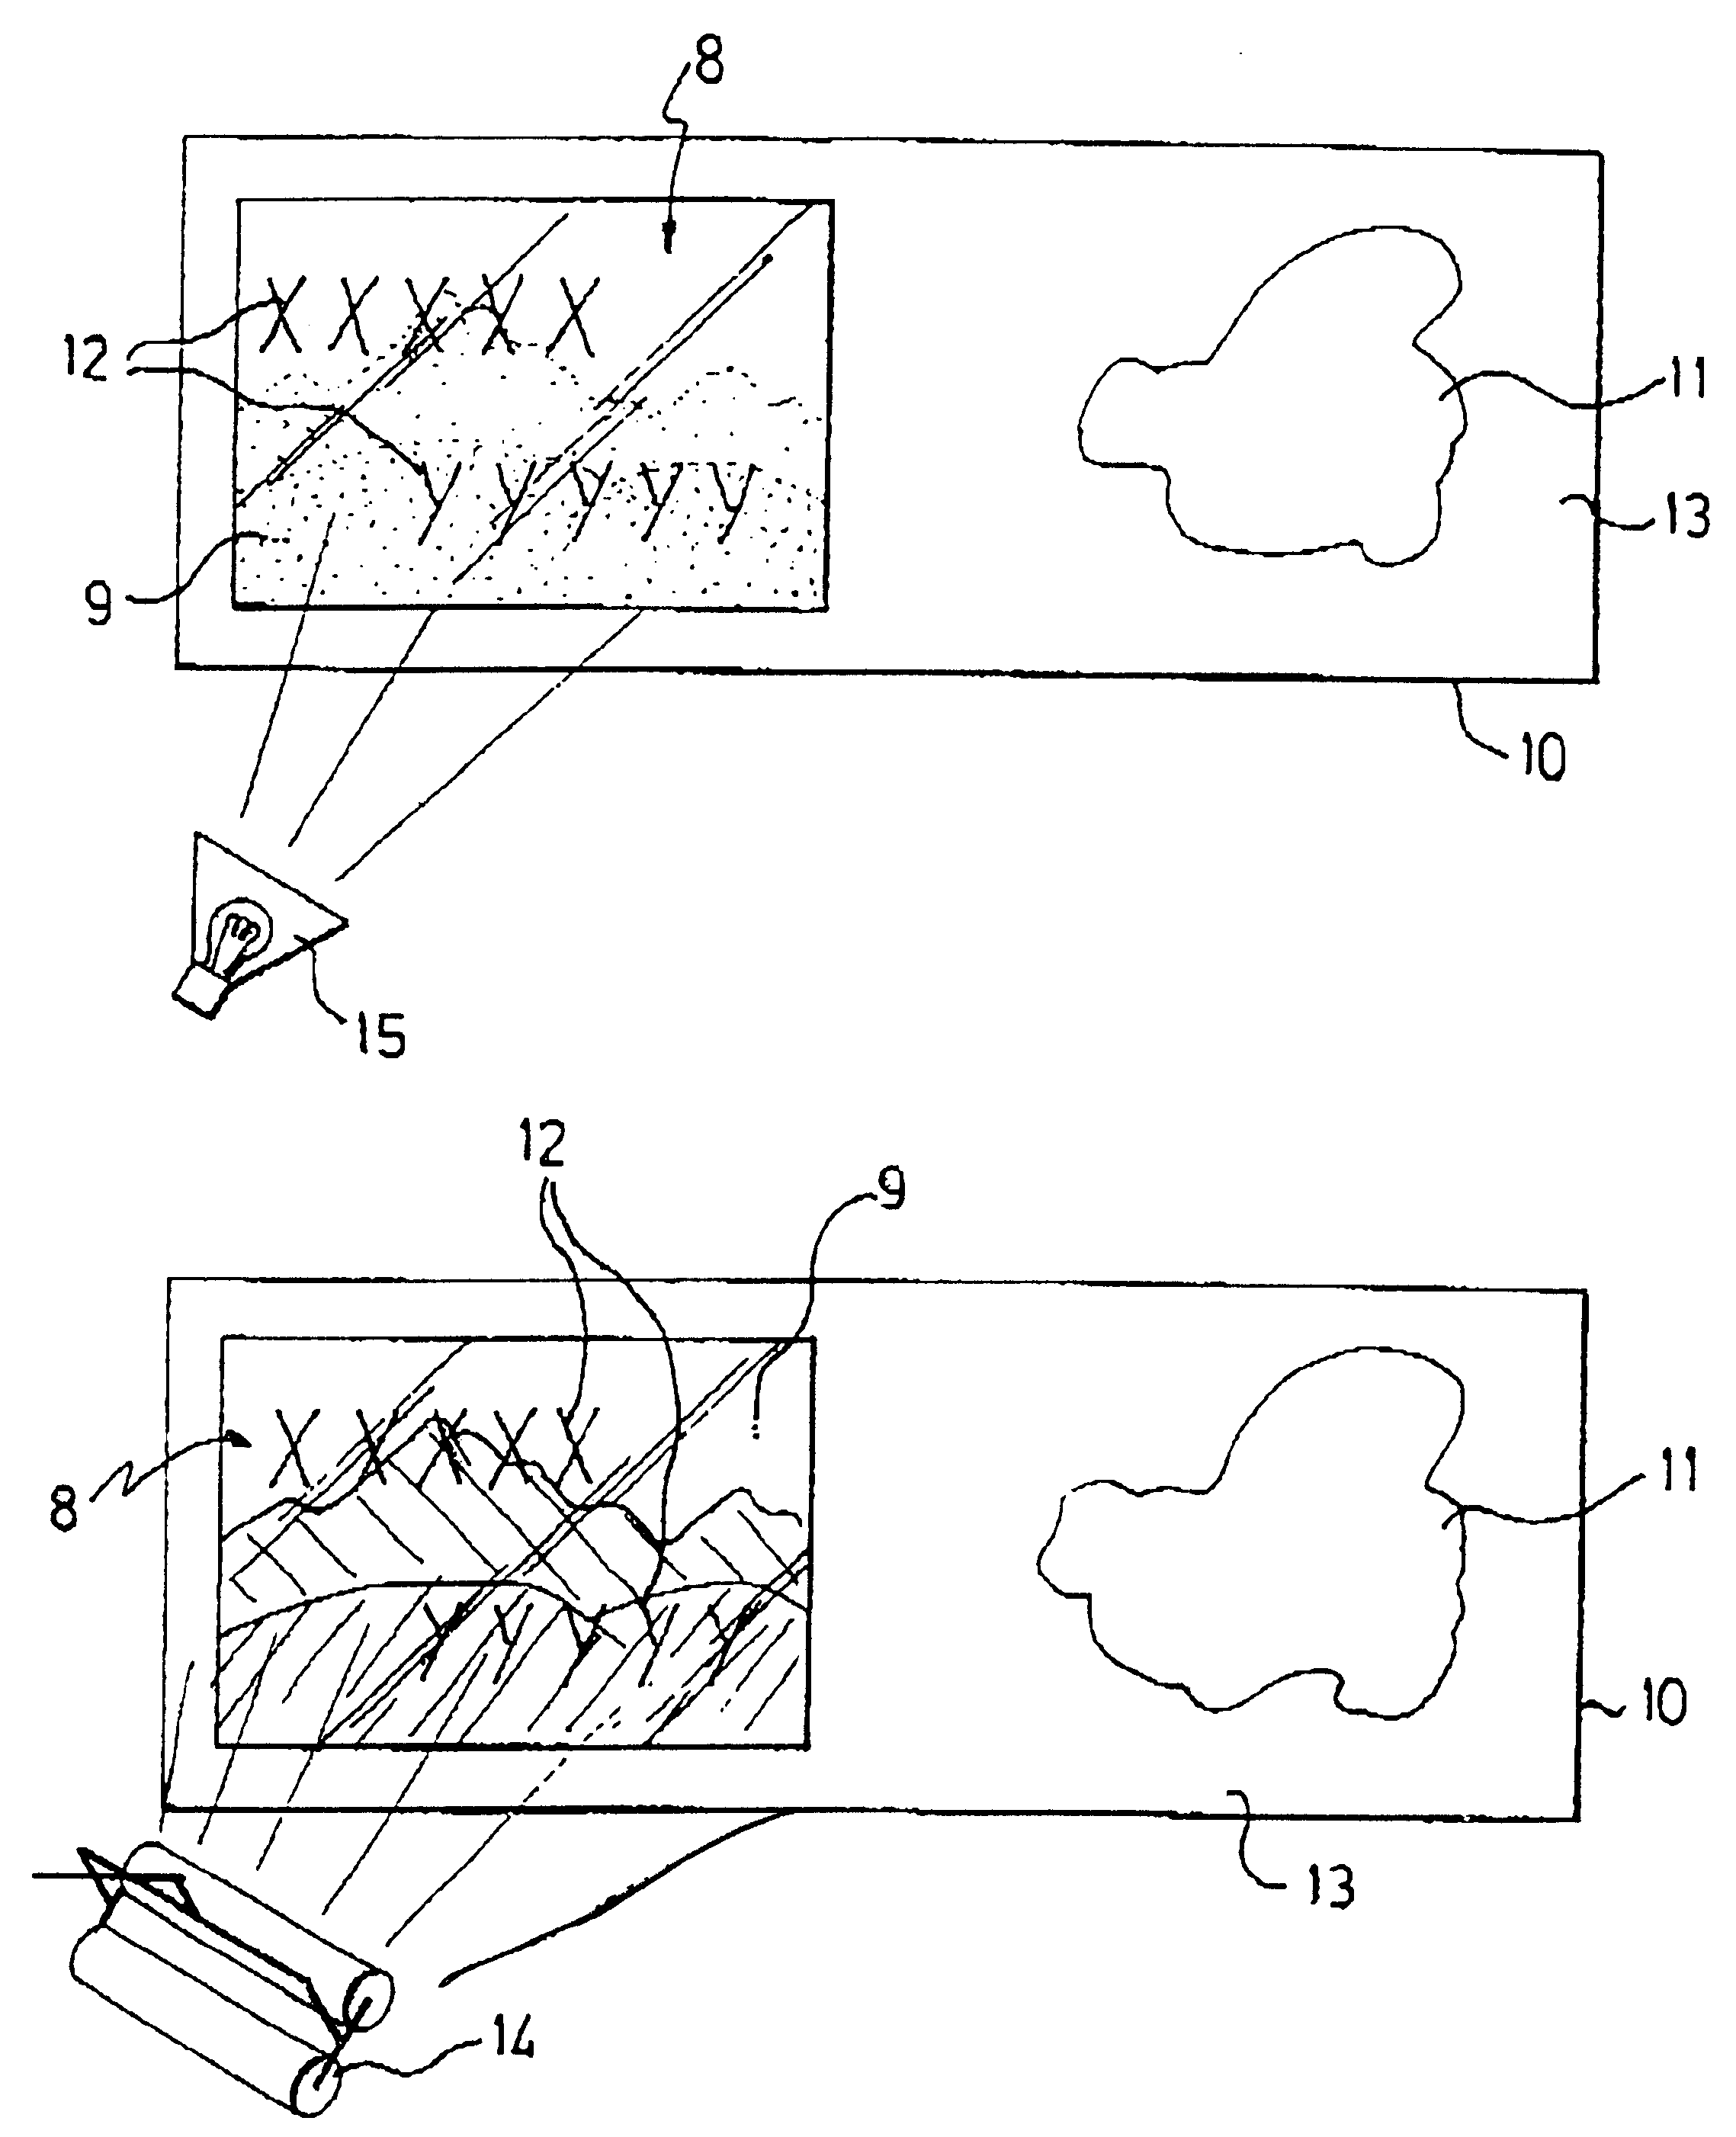 Method for producing a particular photoluminescent polychromatic printed image, resulting image and uses